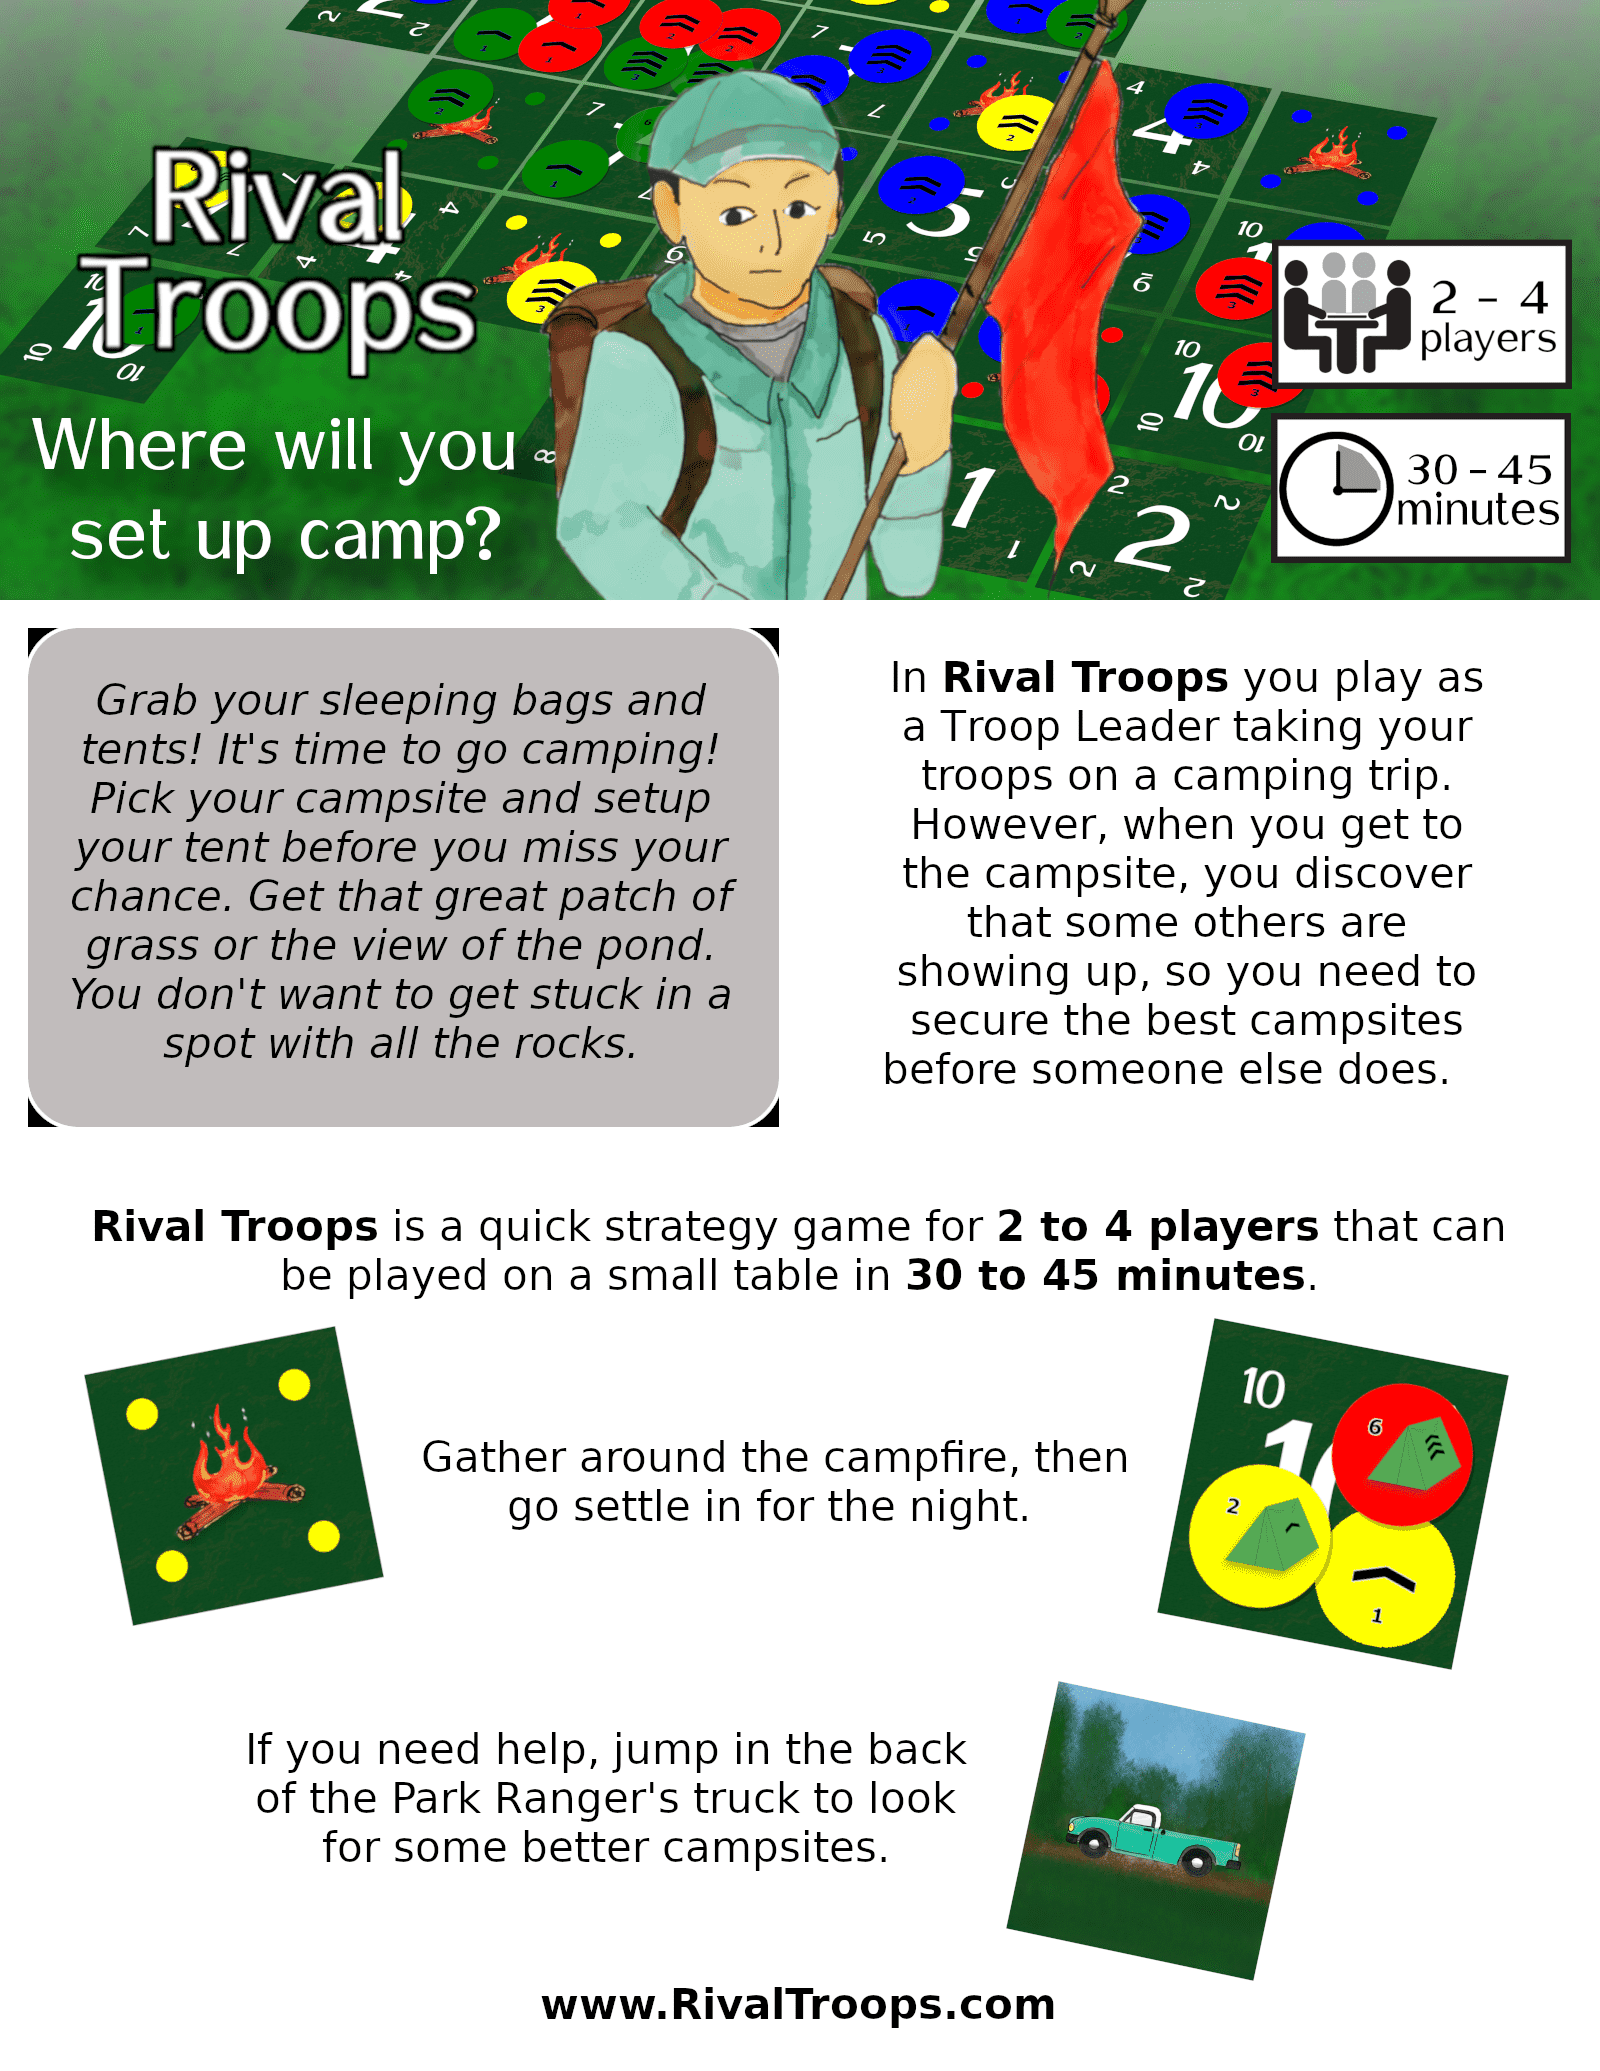 rival-troops-pitch-sheet-compressed.png